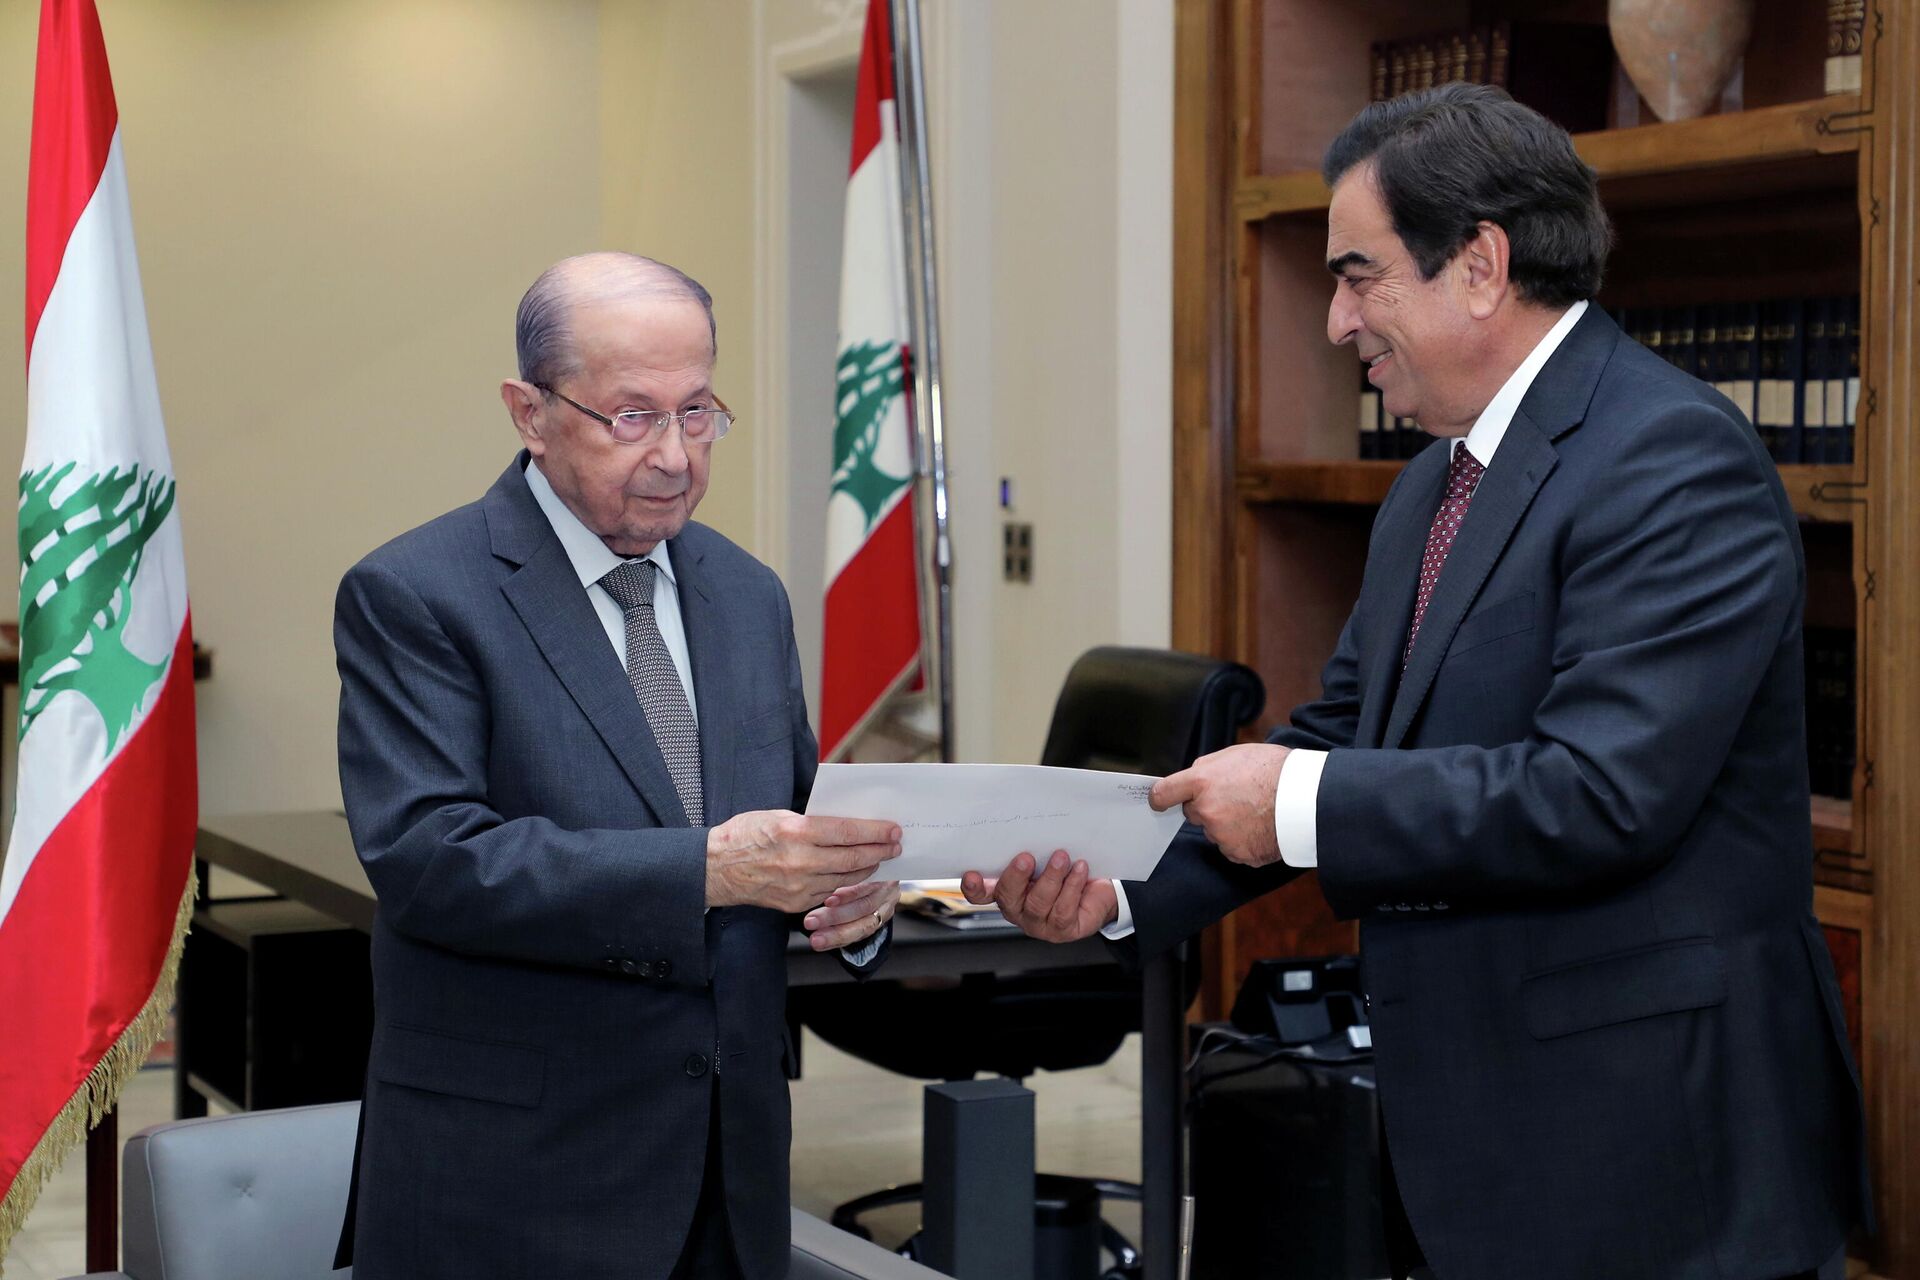 Lebanon's President Michel Aoun meets with George Kordahi after his resignation as Information Minister, at the presidential palace in Baabda, Lebanon December 3, 2021. - Sputnik International, 1920, 03.12.2021